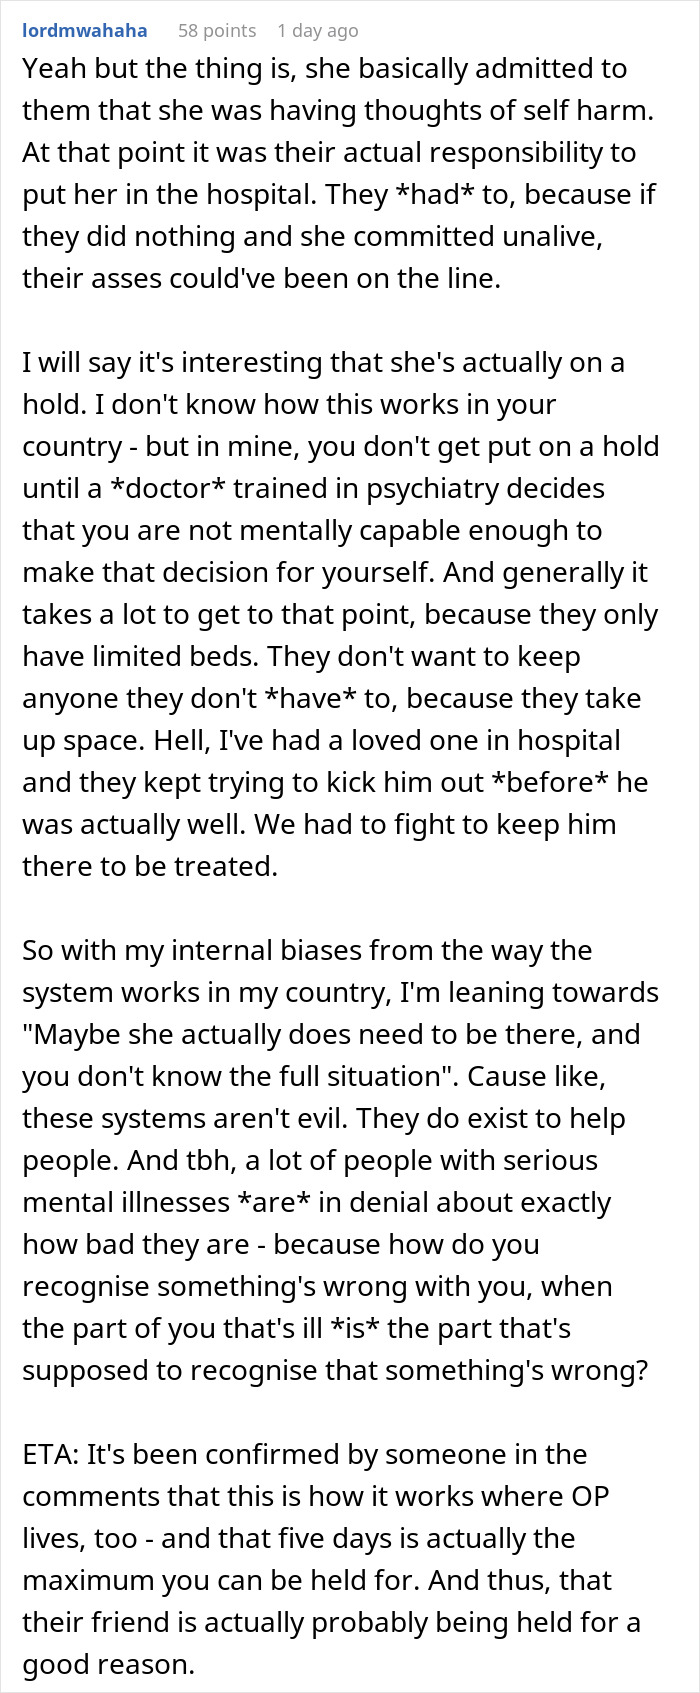 Woman Shares How Her Friend Got Arrested And Taken To A Mental Hospital After Her Work Called The Police When She Decided To Quit